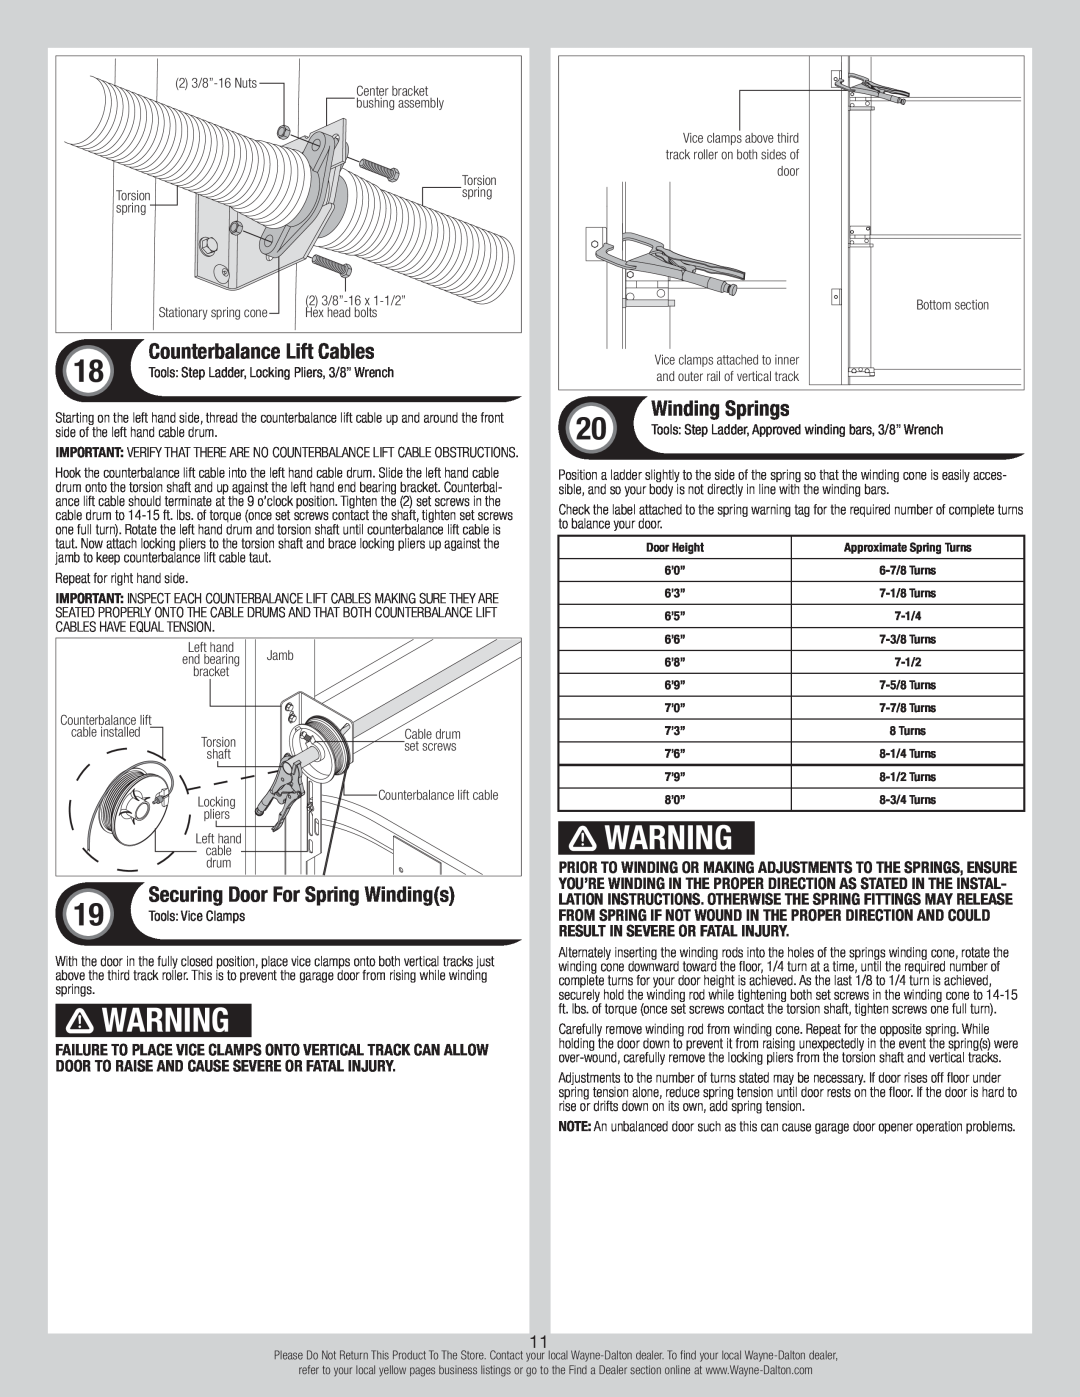 Wayne-Dalton 9800 installation instructions Winding Springs, Counterbalance Lift Cables, Securing Door For Spring Windings 